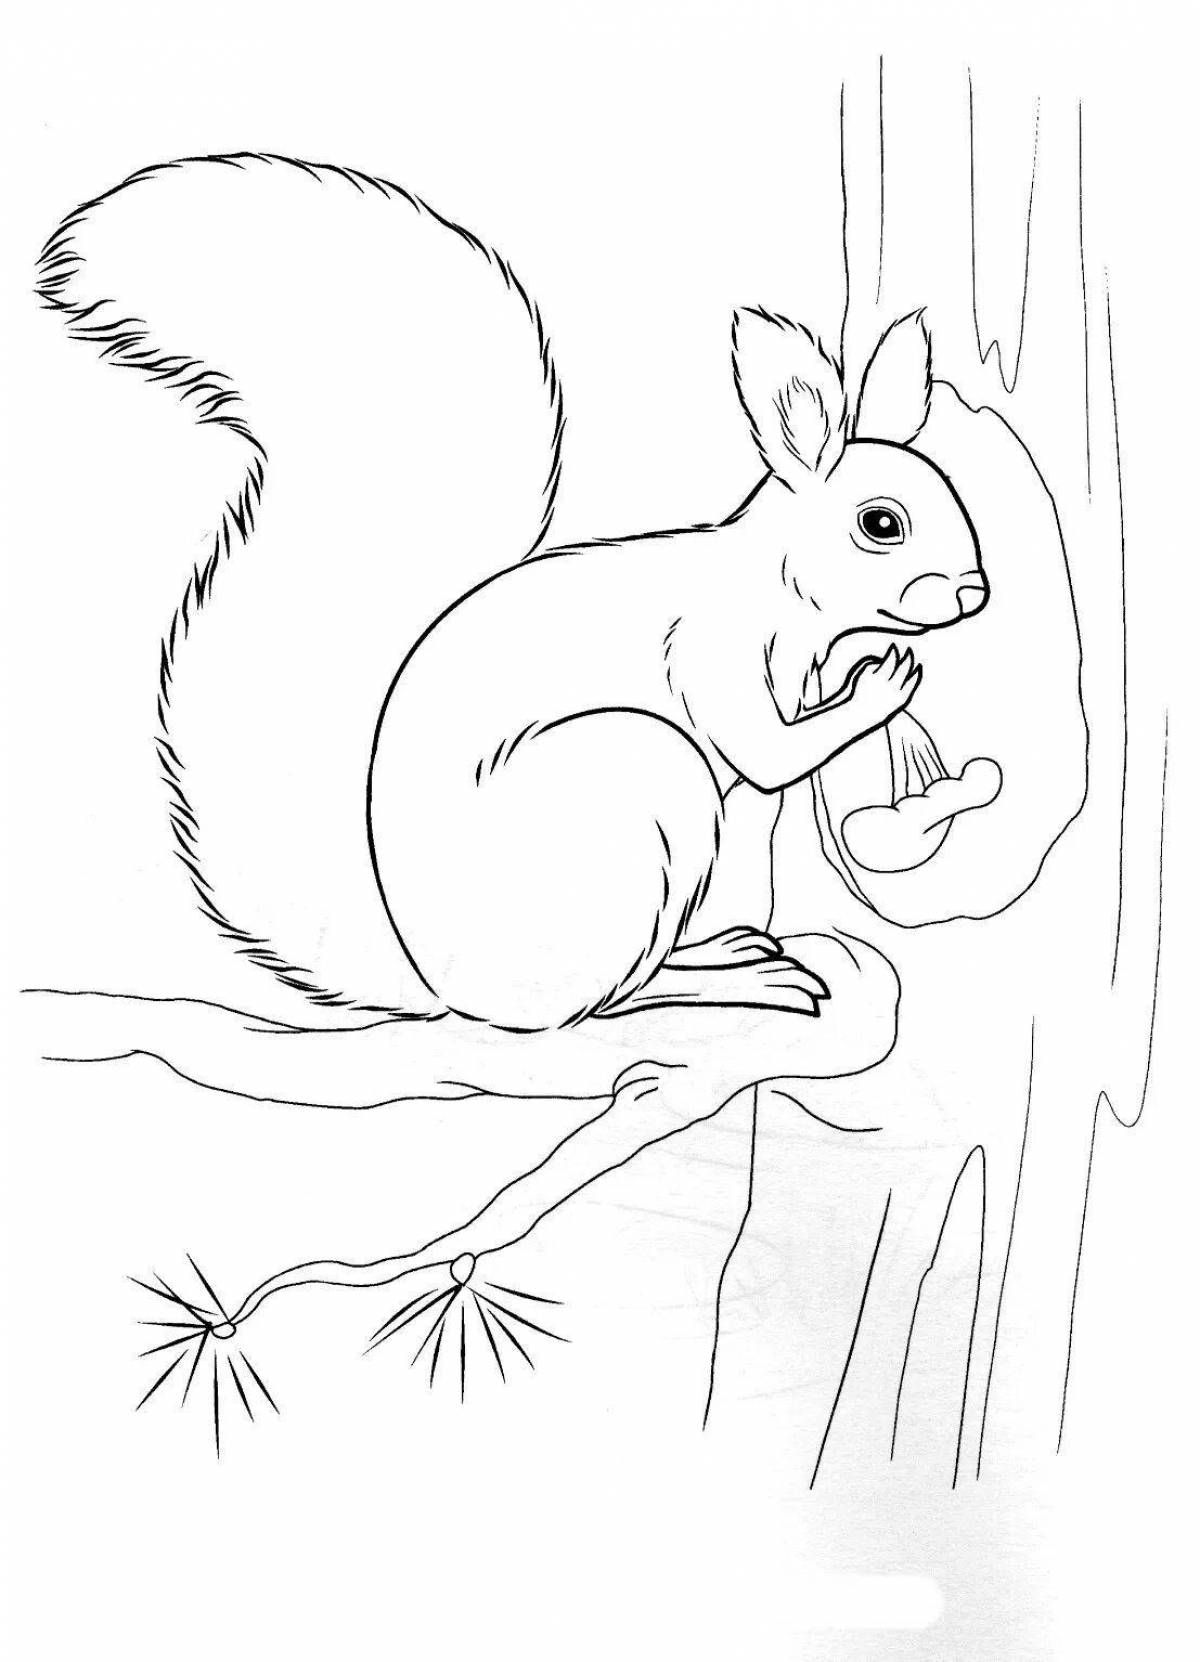 Cute forest animals coloring pages for kids